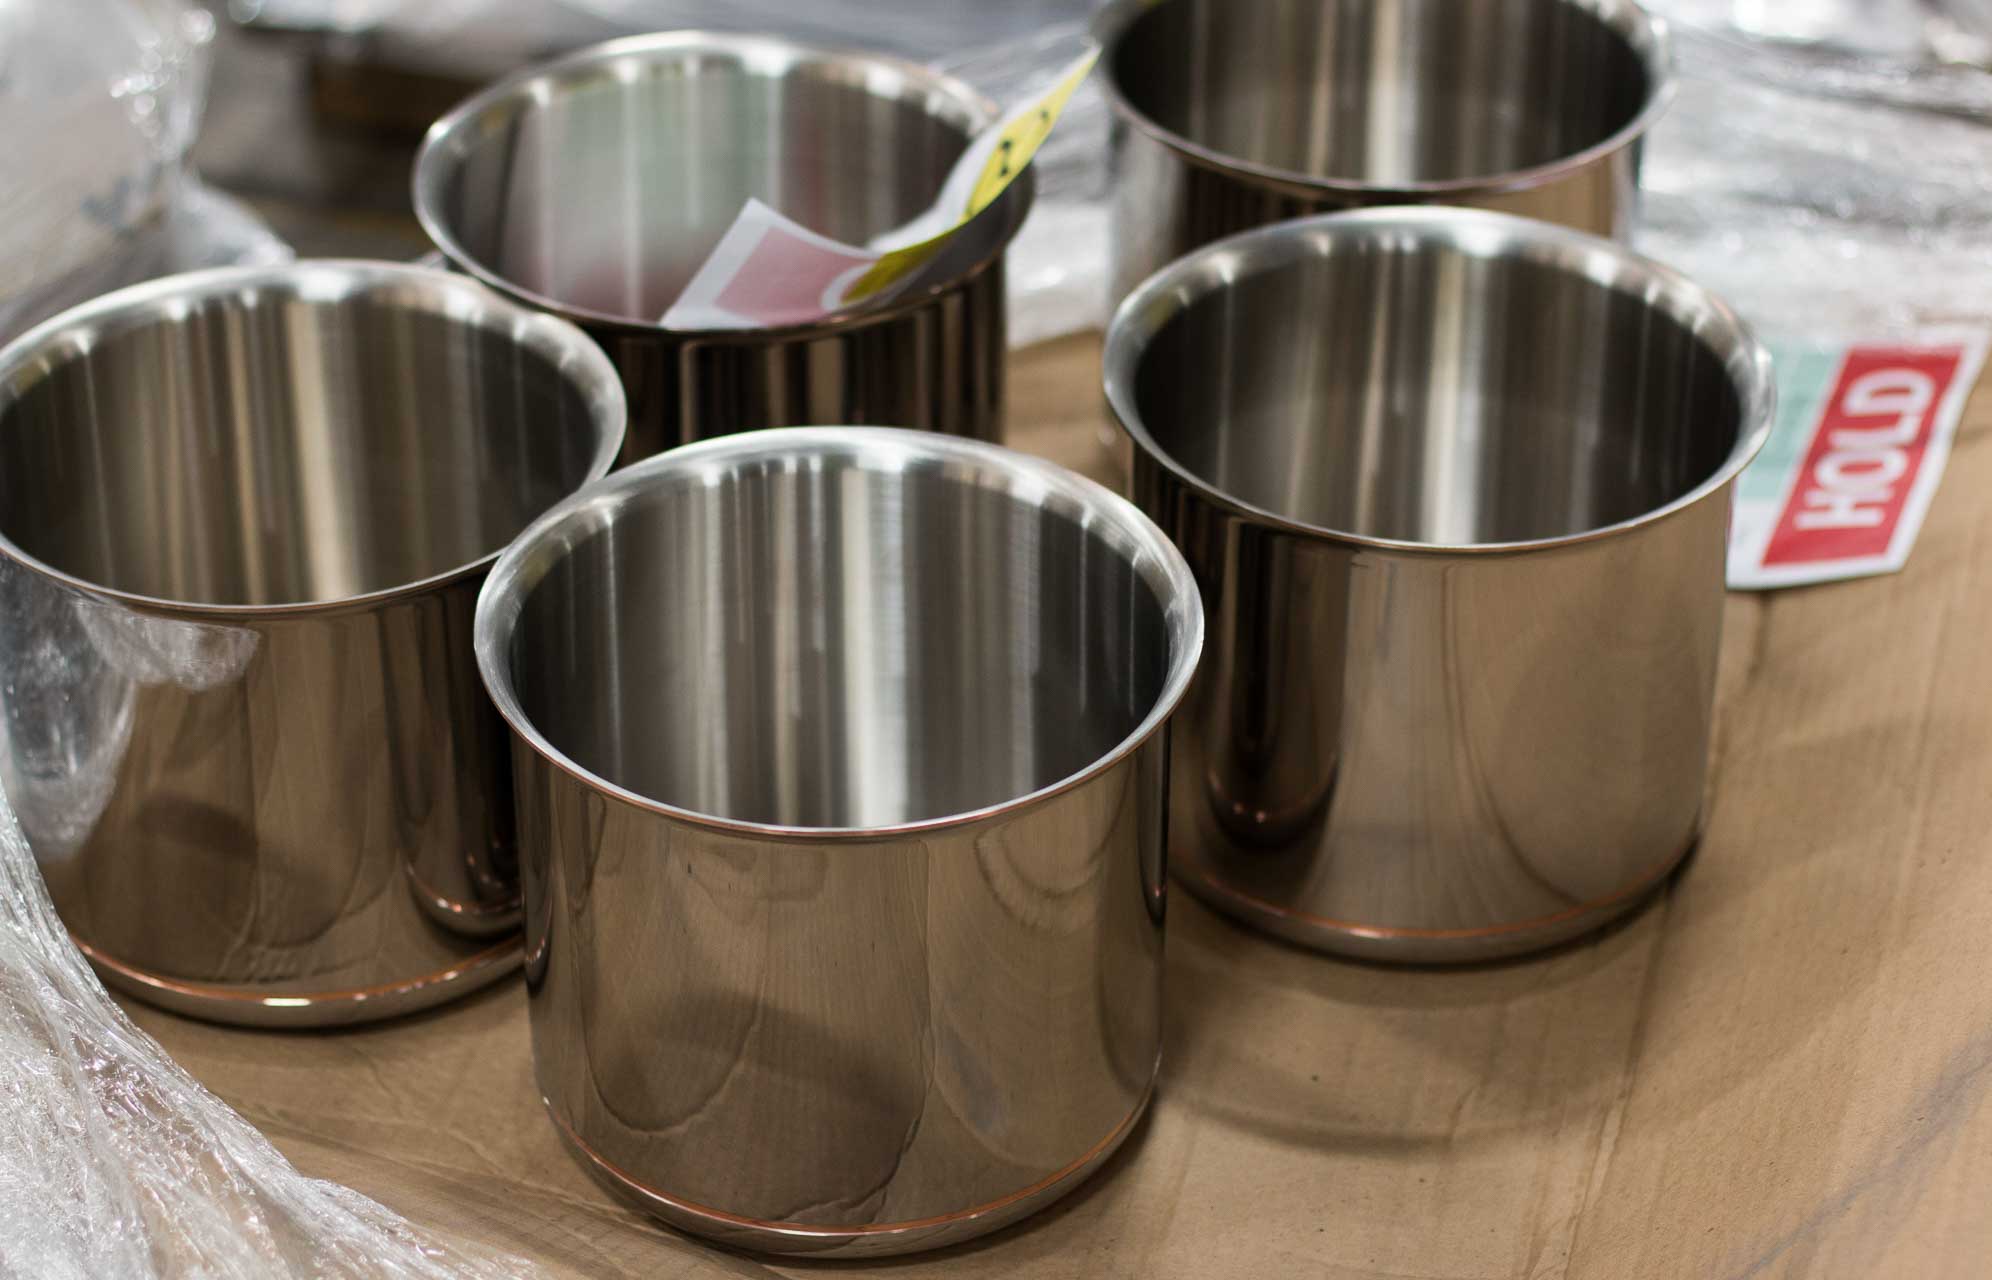 A Visit to the All-Clad Cookware Factory